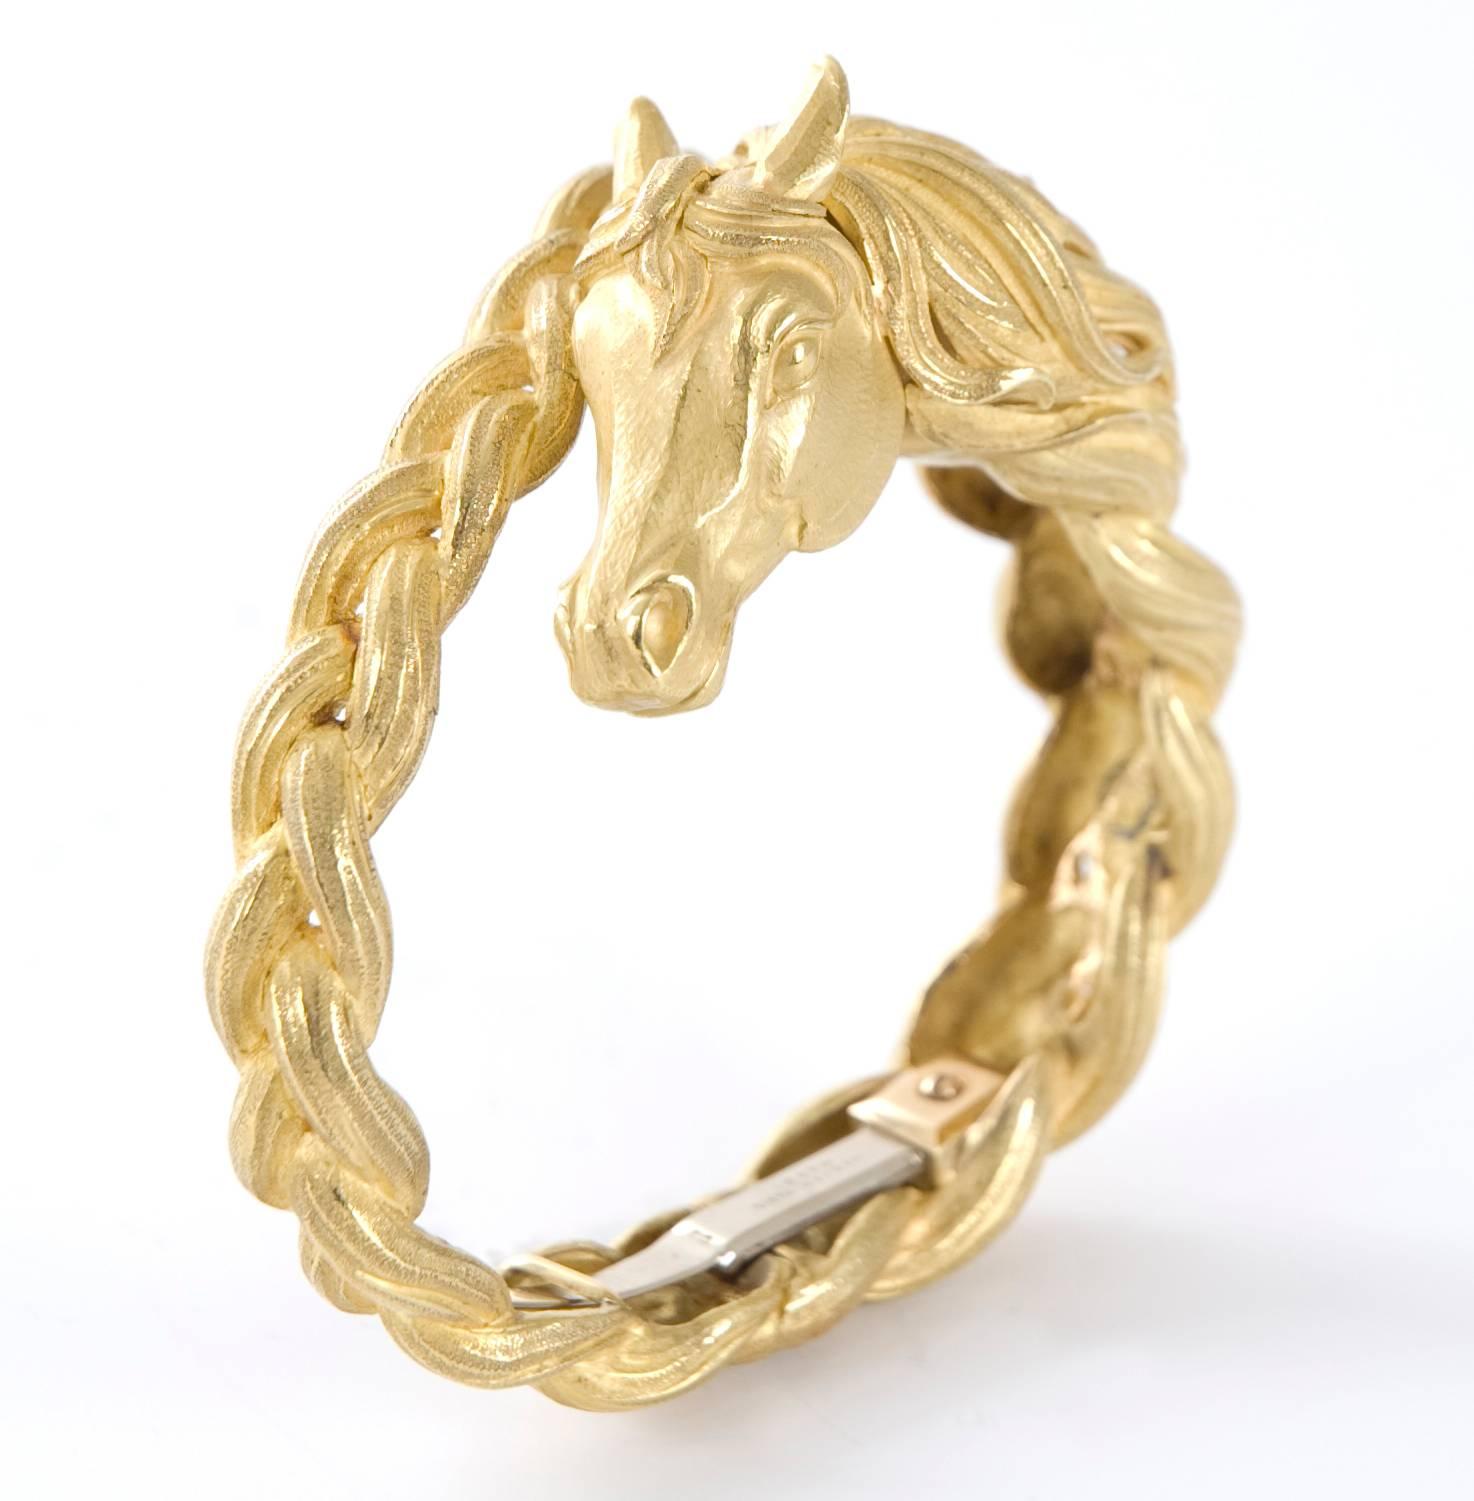 HERMÈS SCULPTED GOLD HORSE BANGLE
Designed as a sculpted gold hinged bangle depicting a horse head and mane
Metal: 18k yellow gold
Size/Dimensions: 15.2 cm, 2 cm at widest point
Signature: HERMÈS
Marks: French gold mark, numbered
Gross Weight: 130.7